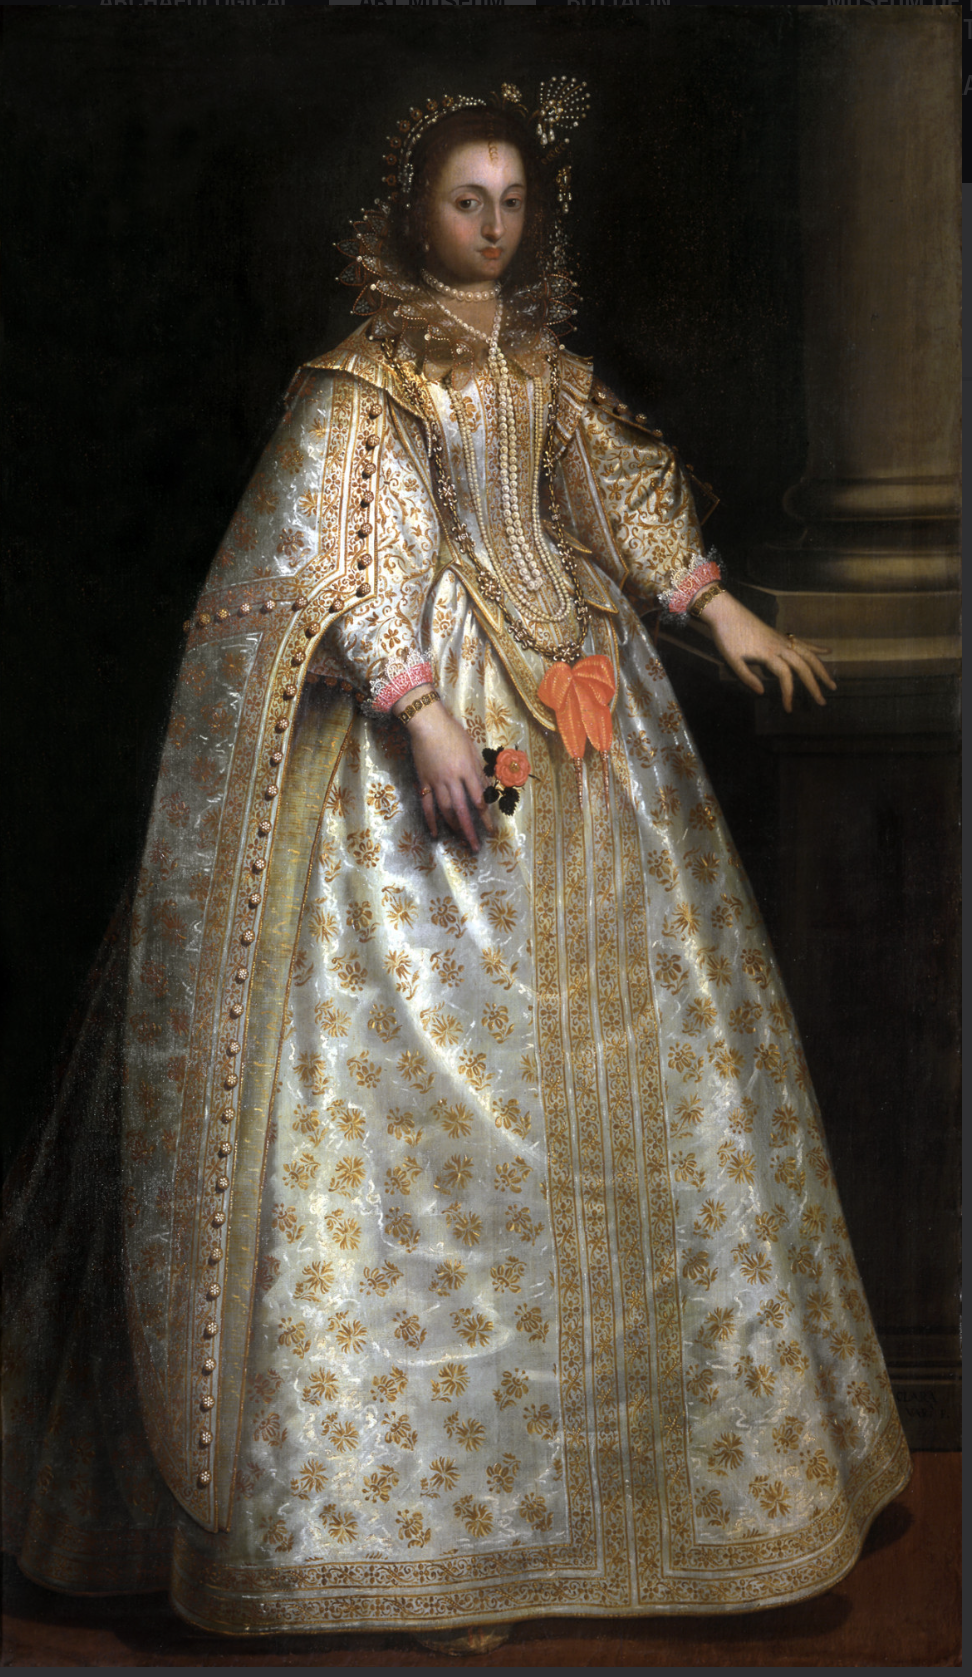 A full-length portrait of a young woman in an extraordinarily elaborate light gray gown with gold embellishments and jewels, as well as pink lace trim and an orange bow. She has a very high, oversized collar and a matching headpiece. She rests one hand on a column and looks directly at the view with a neutral, almost bored expression.